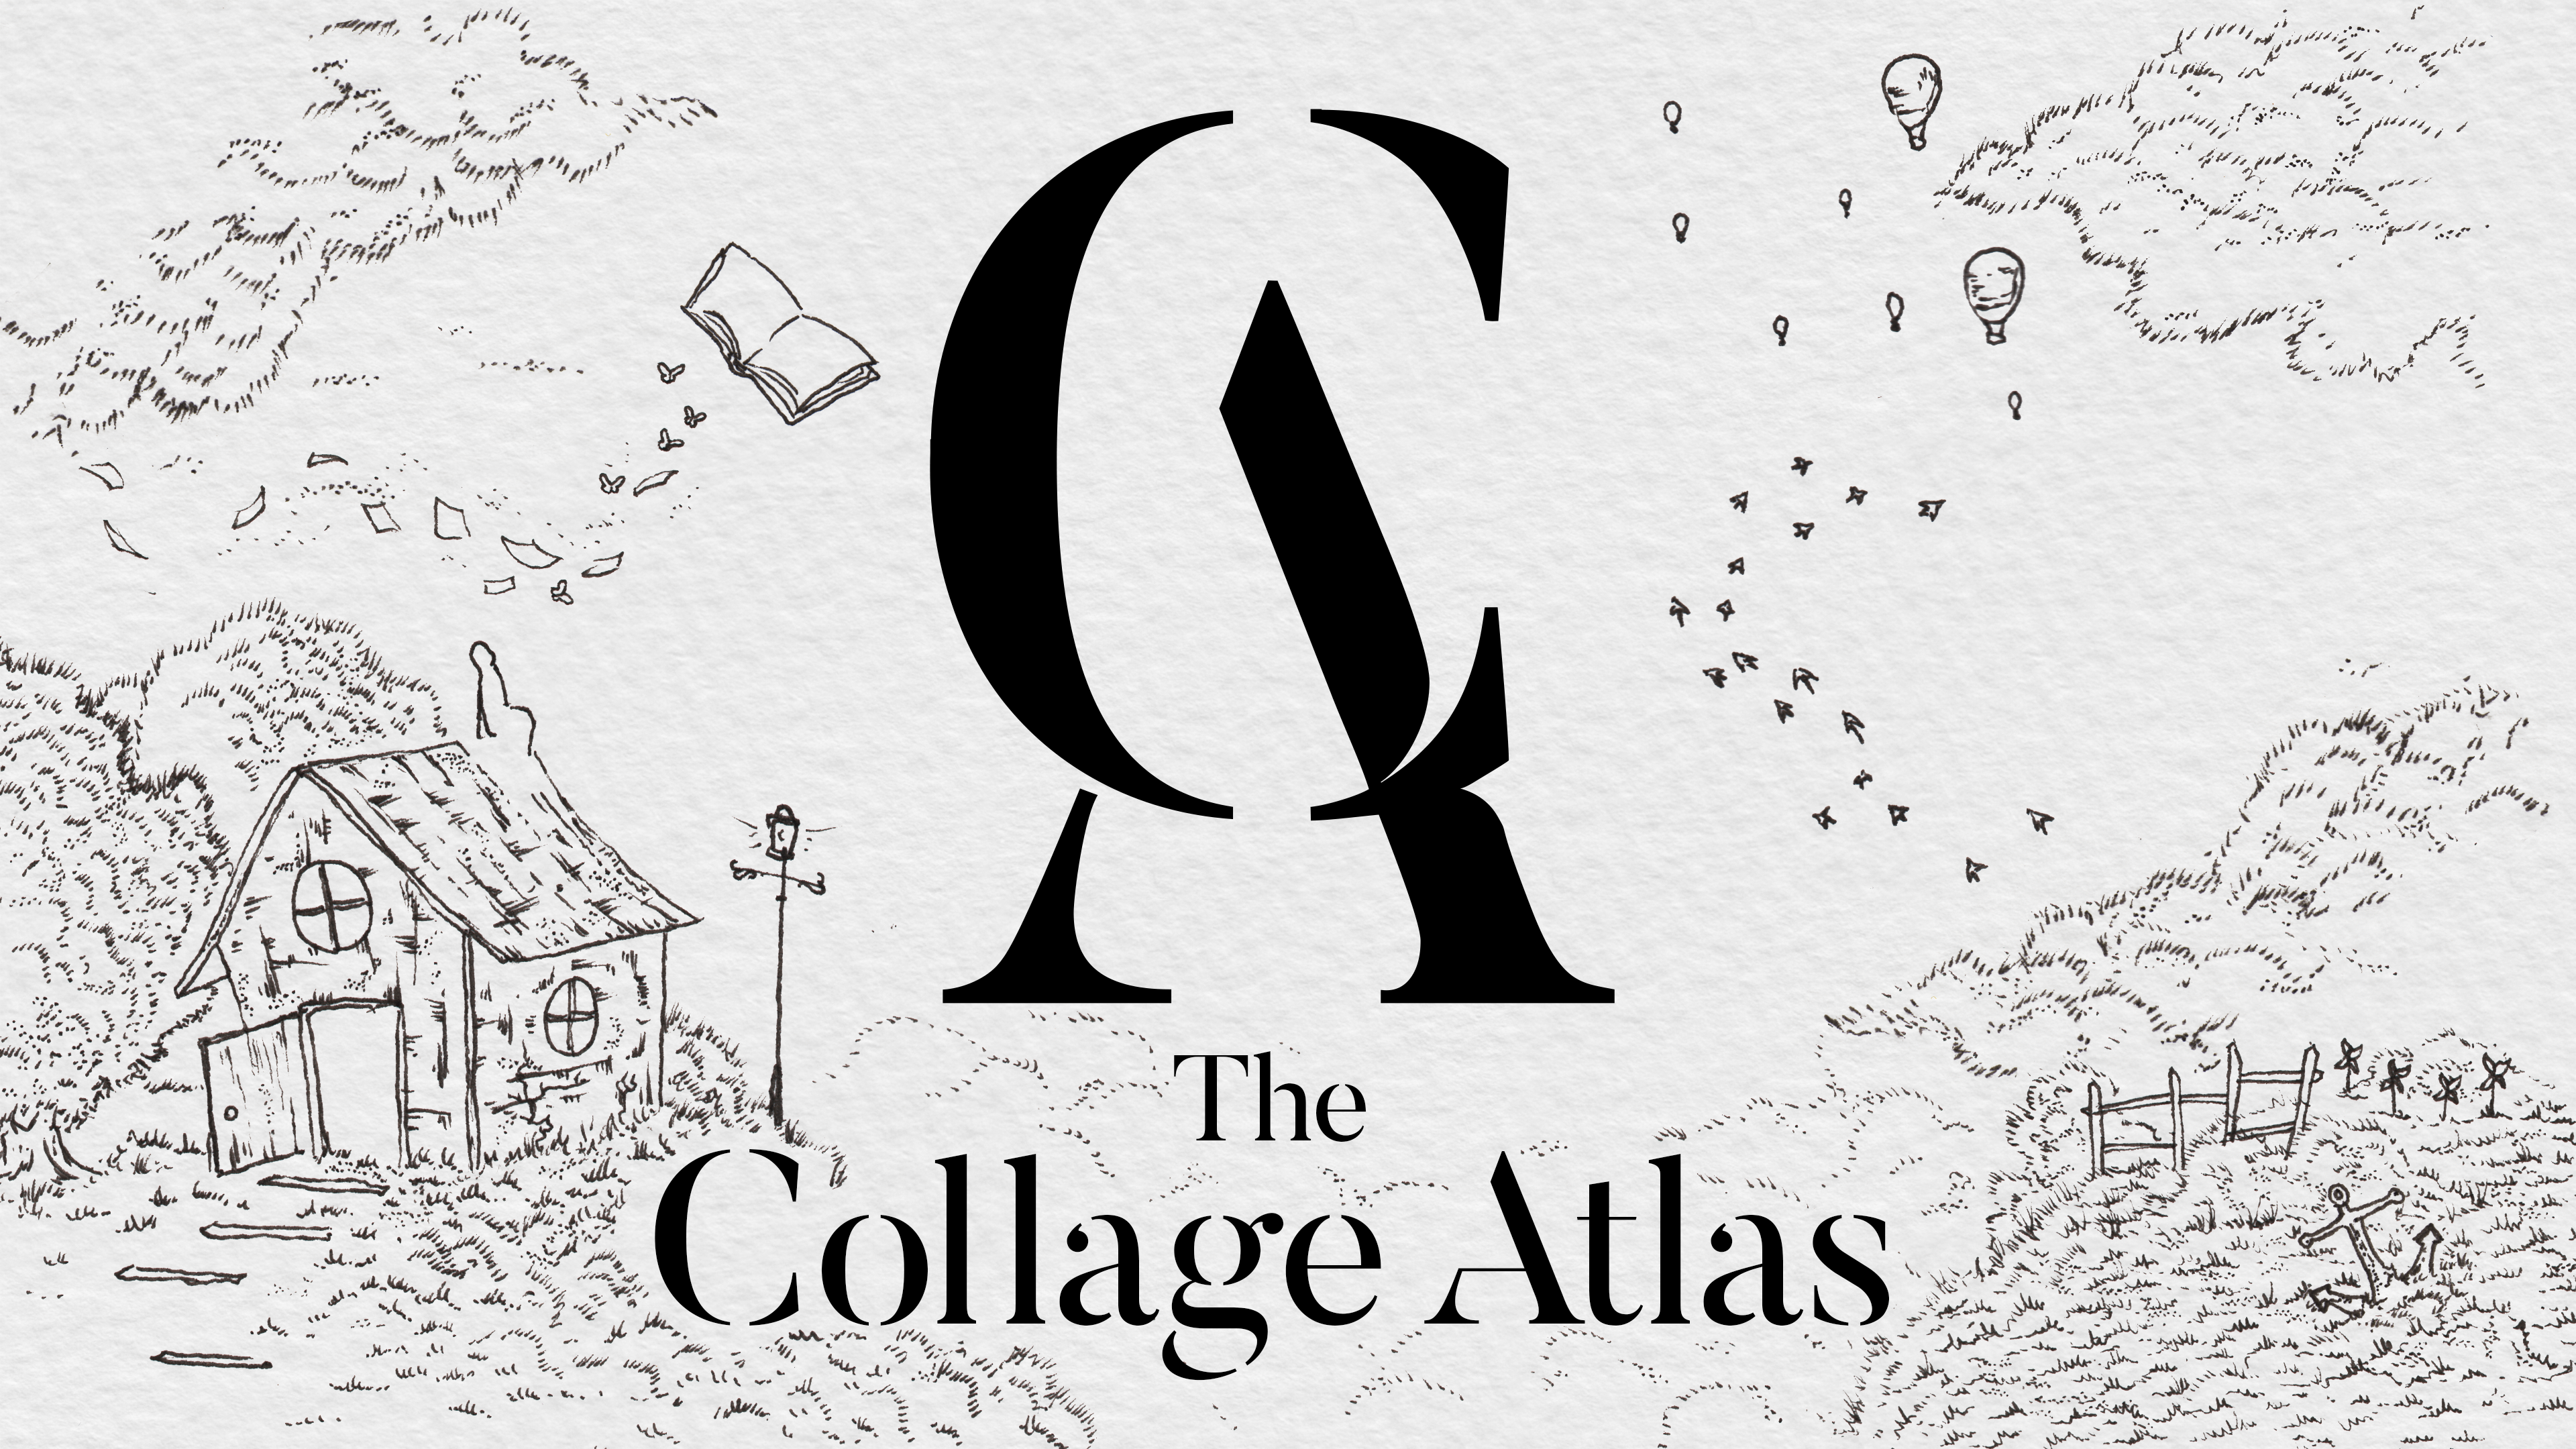 Hand-Drawn Adventure ‘The Collage Atlas’ Is This Week’s Apple Arcade Release And It Is Rolling Out Now Worldwide